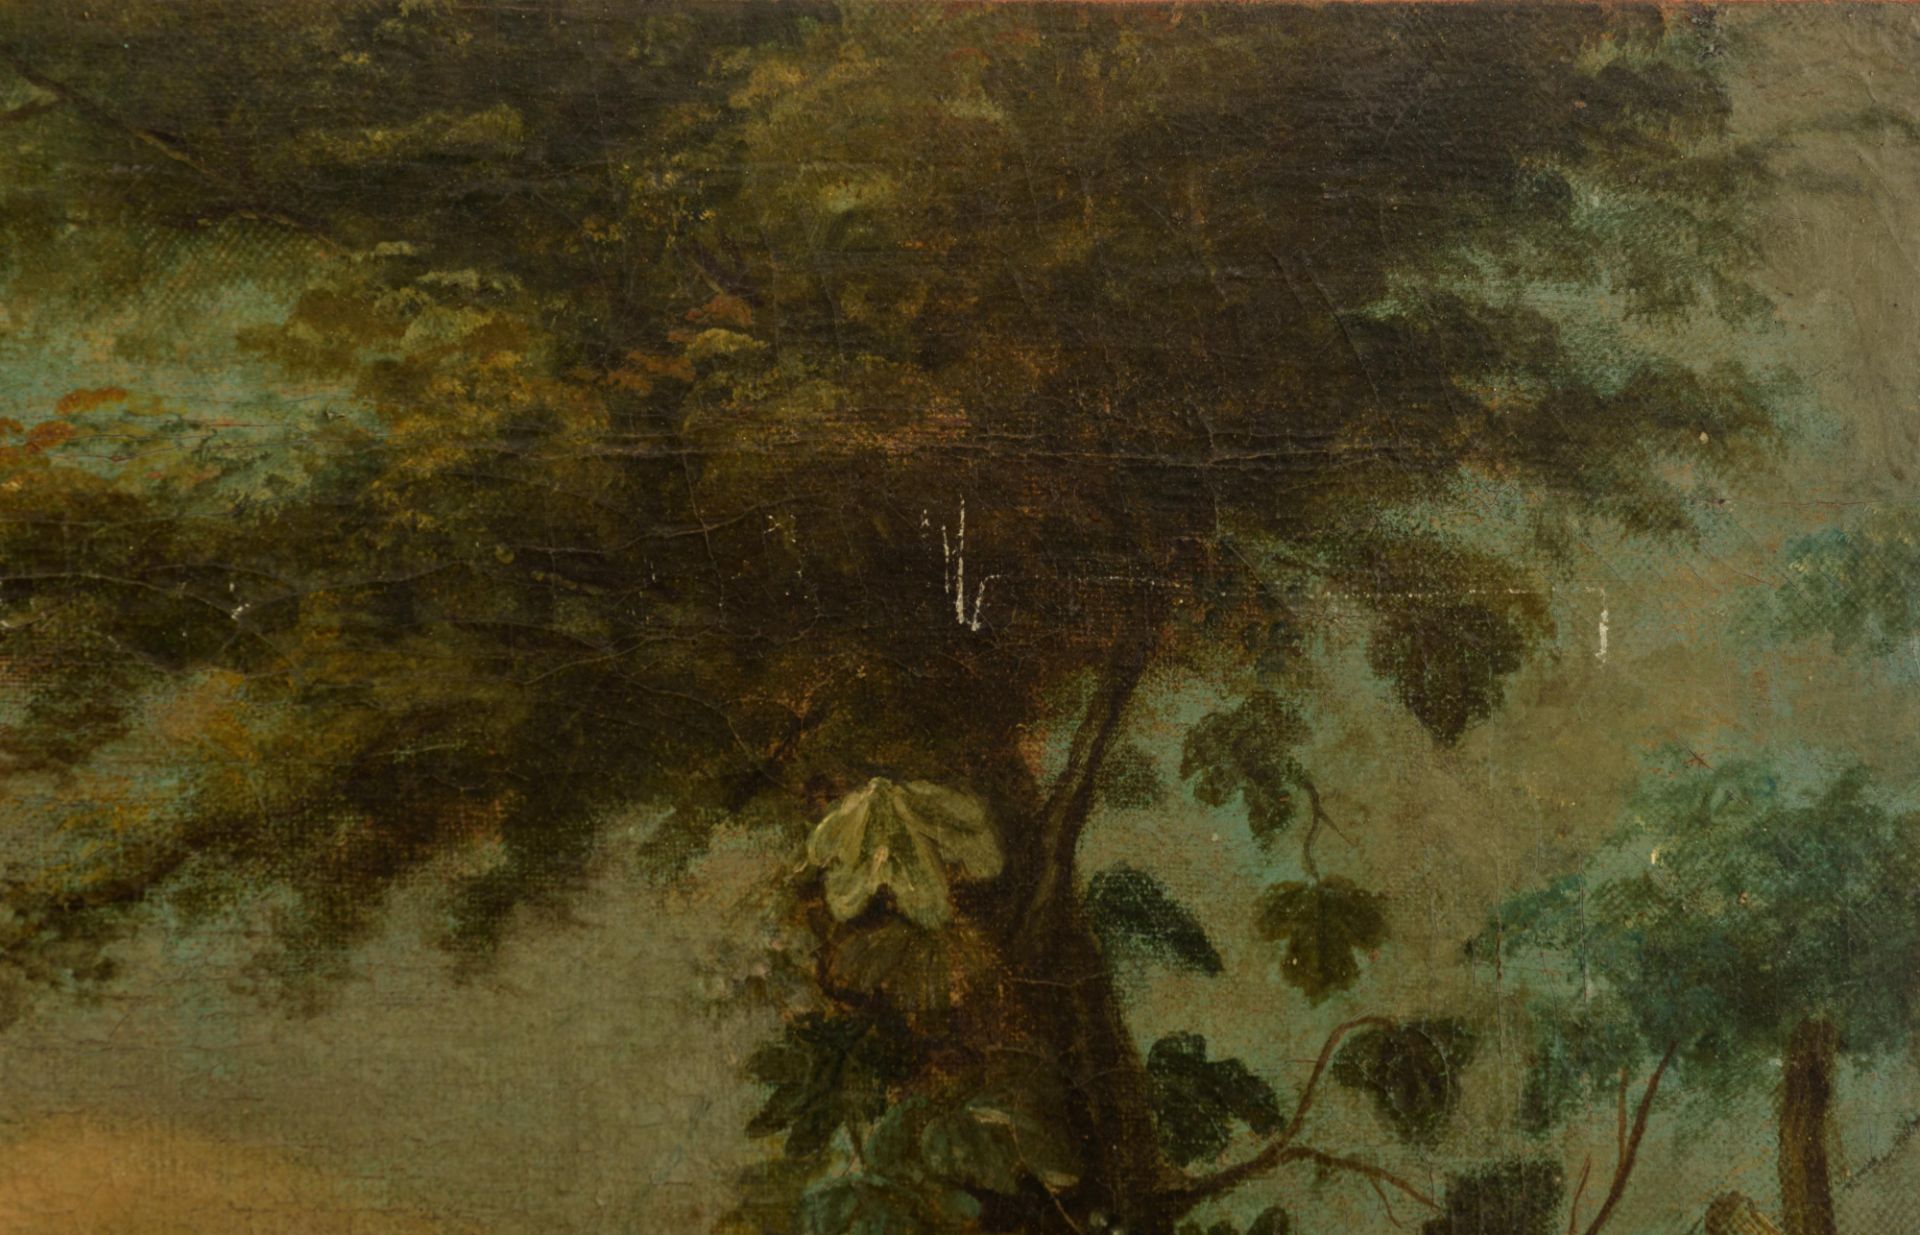 No visible signature, a genre painting depicting the harvest, 18th/19thC, oil on canvas, 66 x 69 cm - Image 8 of 8